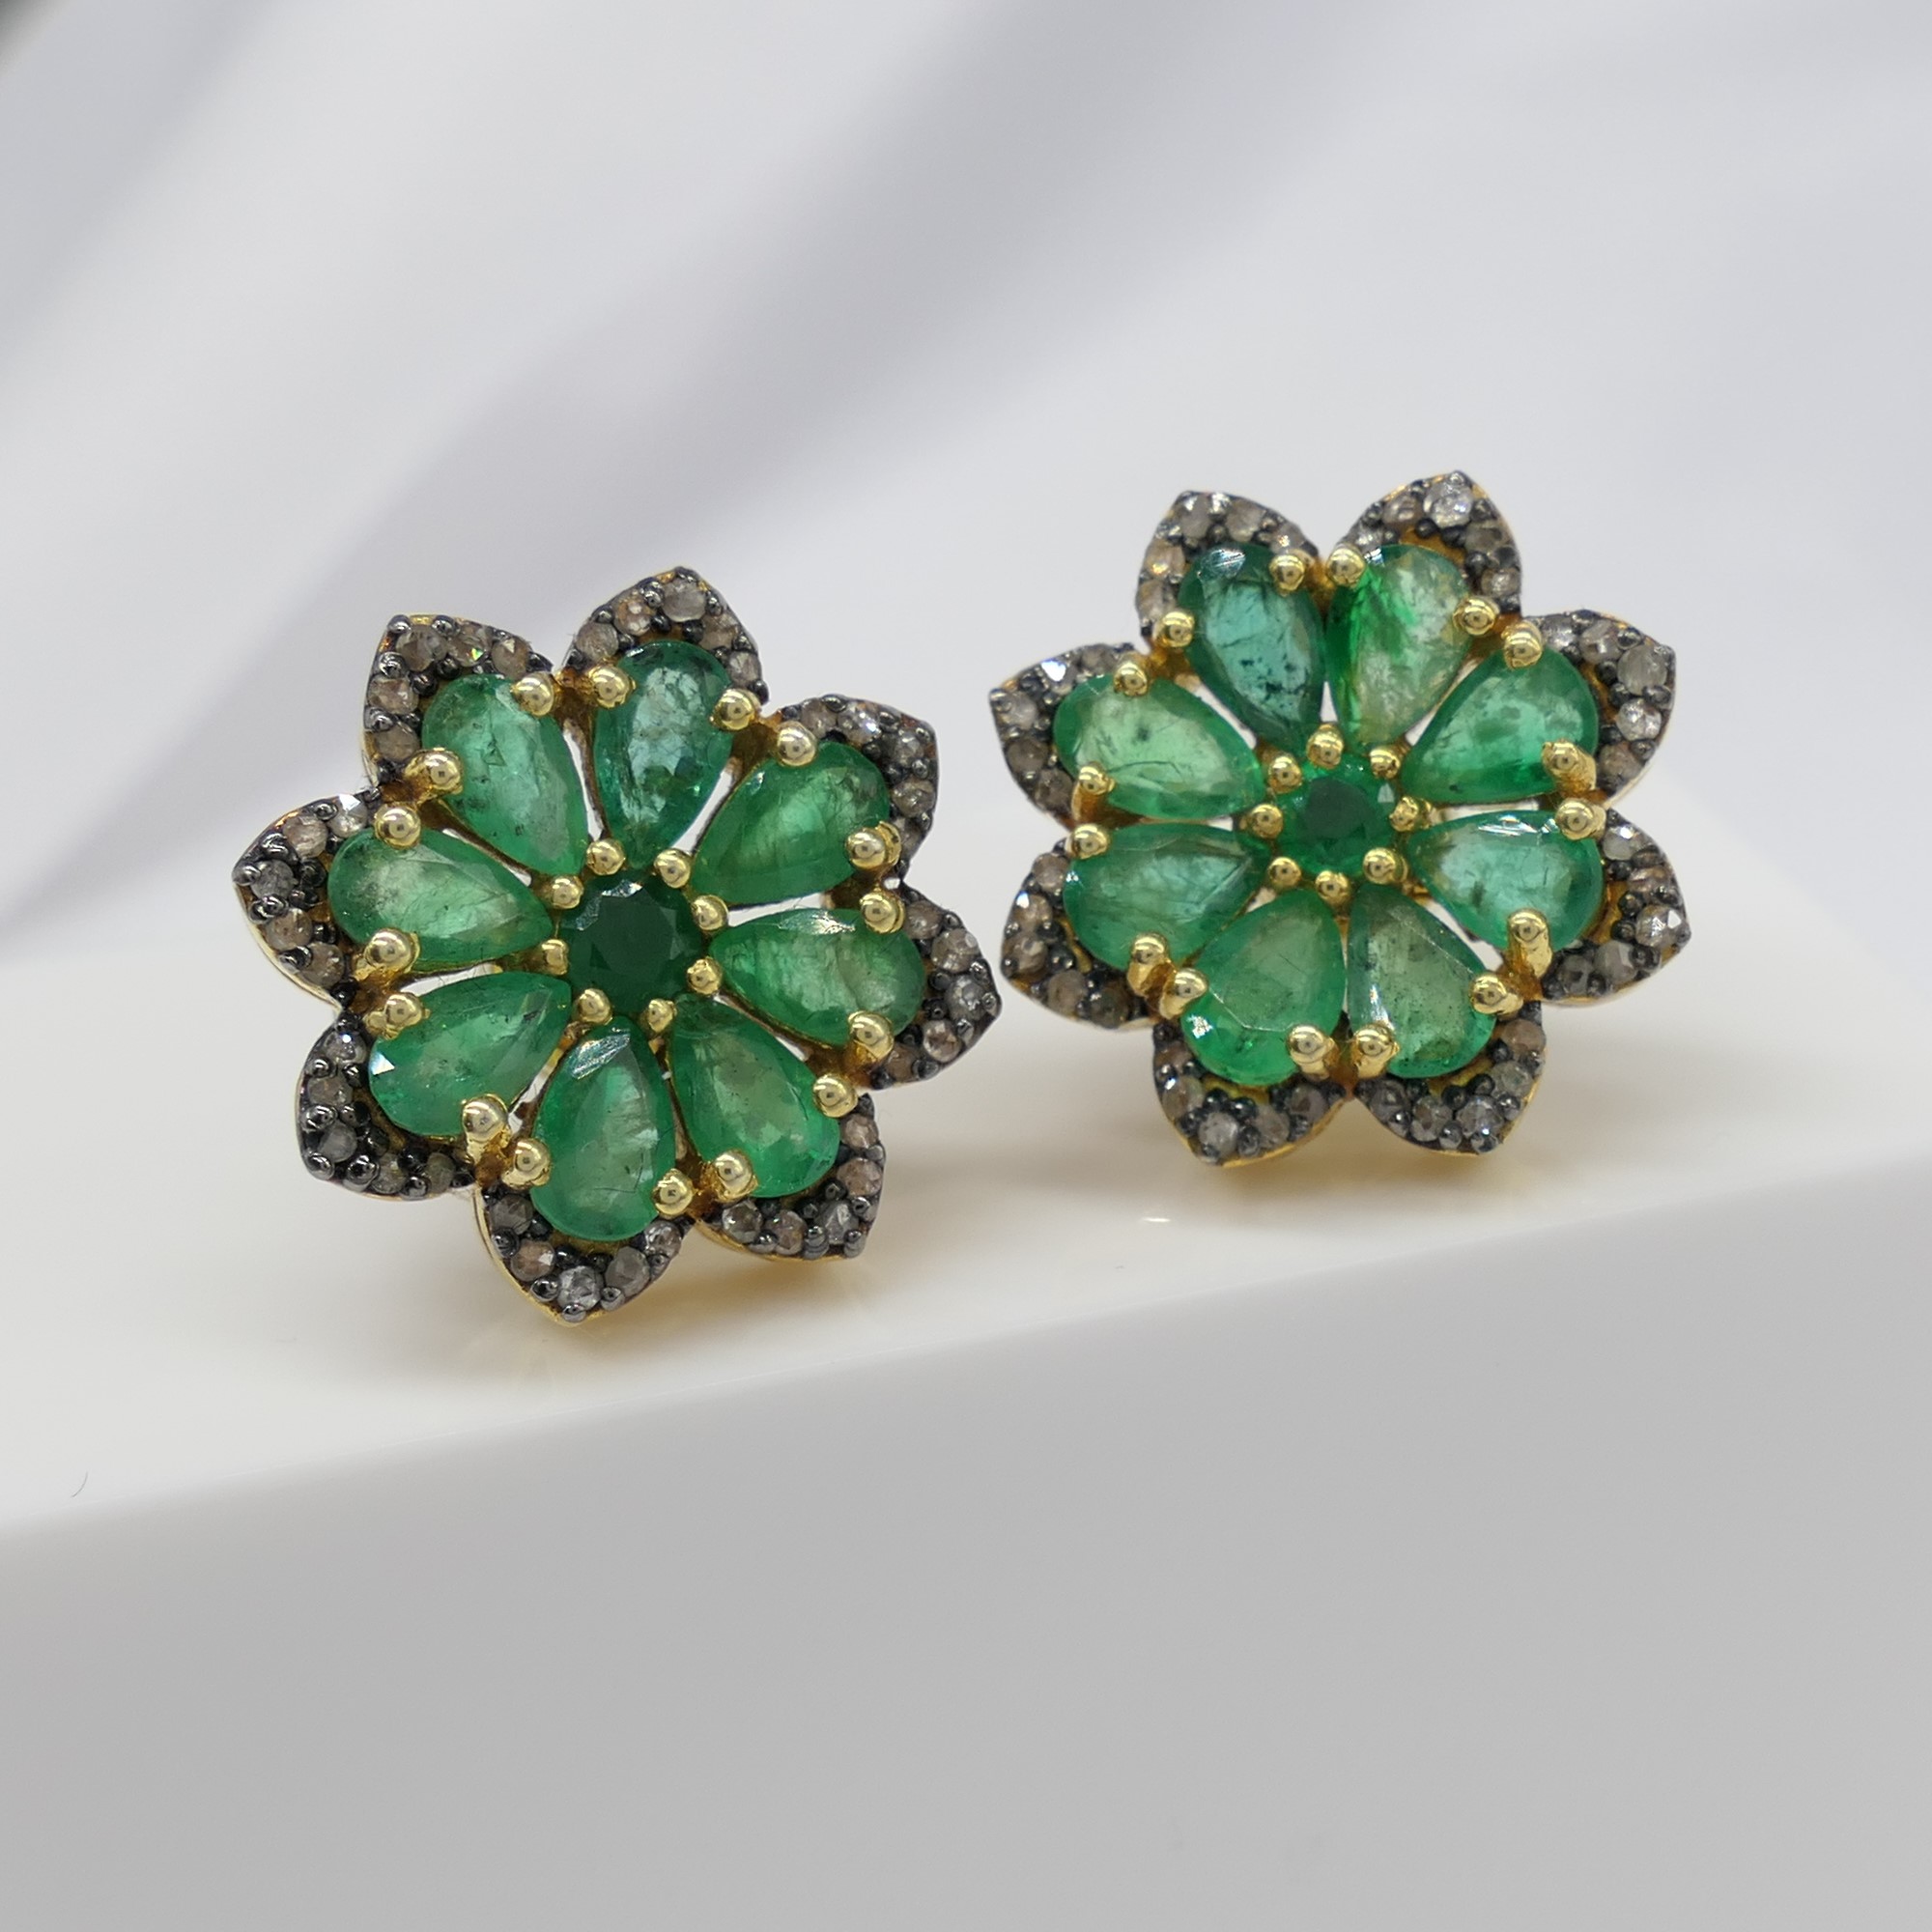 Exciting pair of emerald and diamond flower-style ear studs